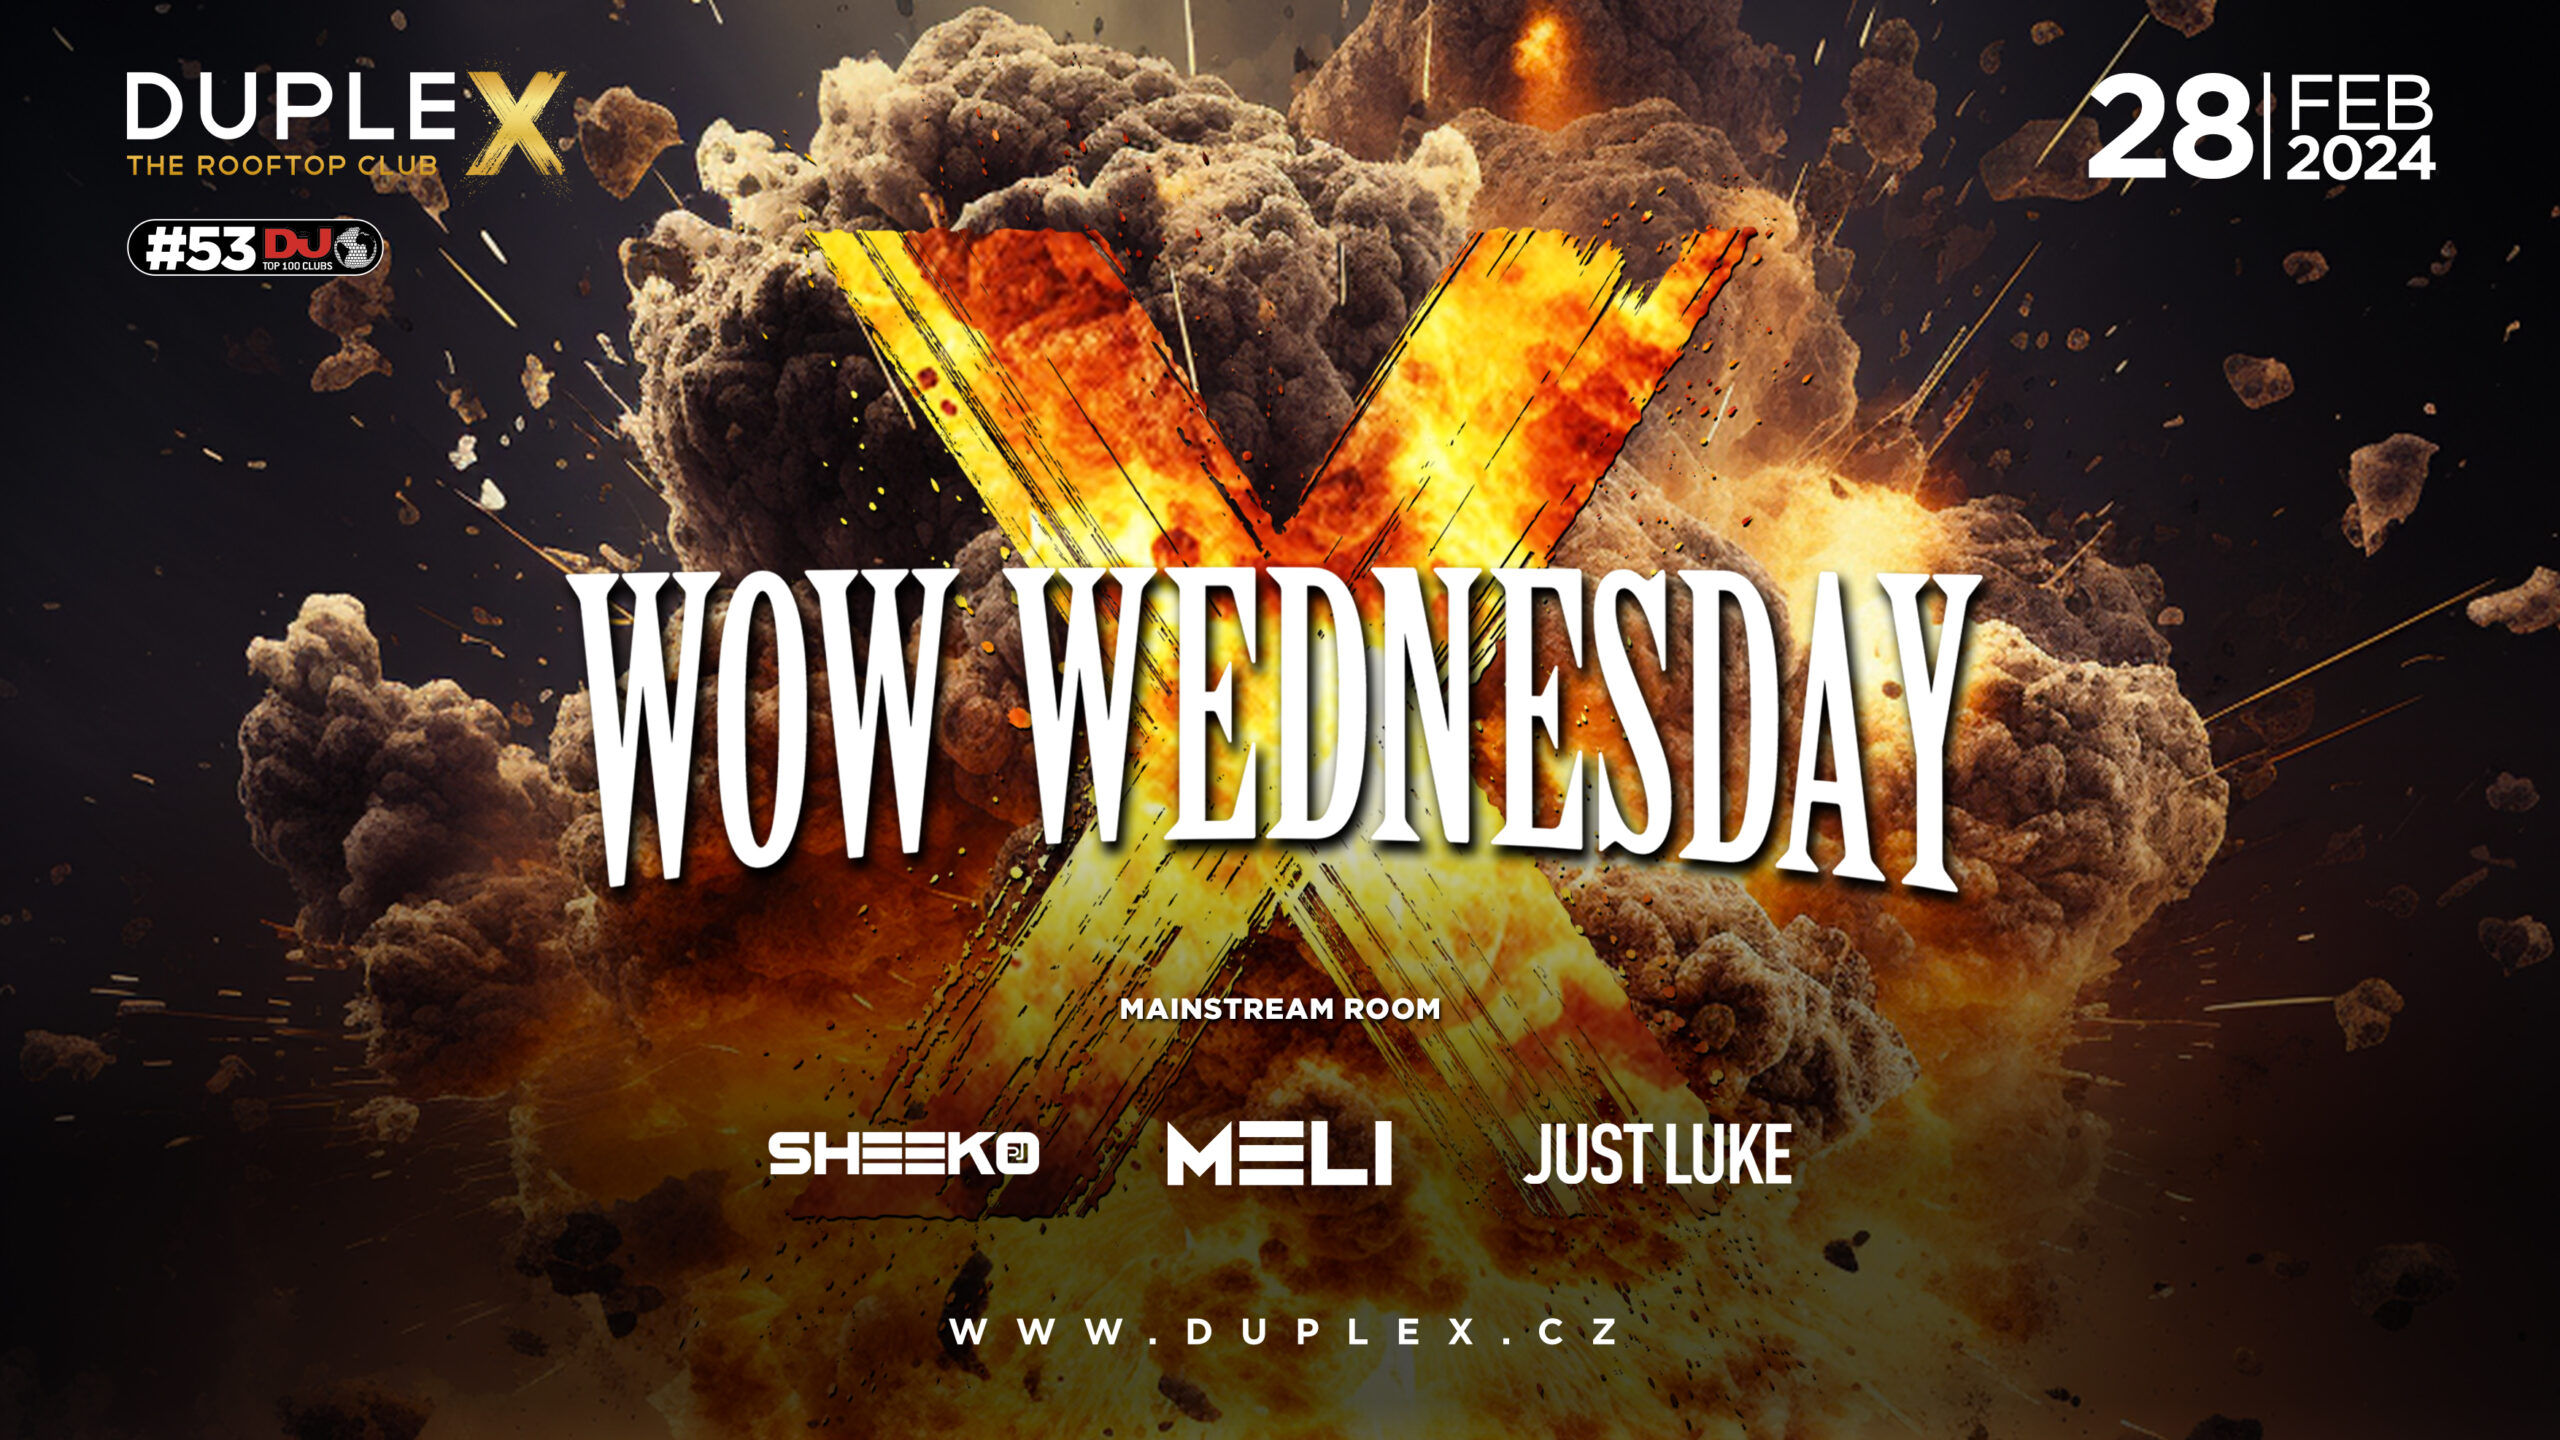 WOW Students Wednesday: The ultimate Erasmus party at DupleX Prague